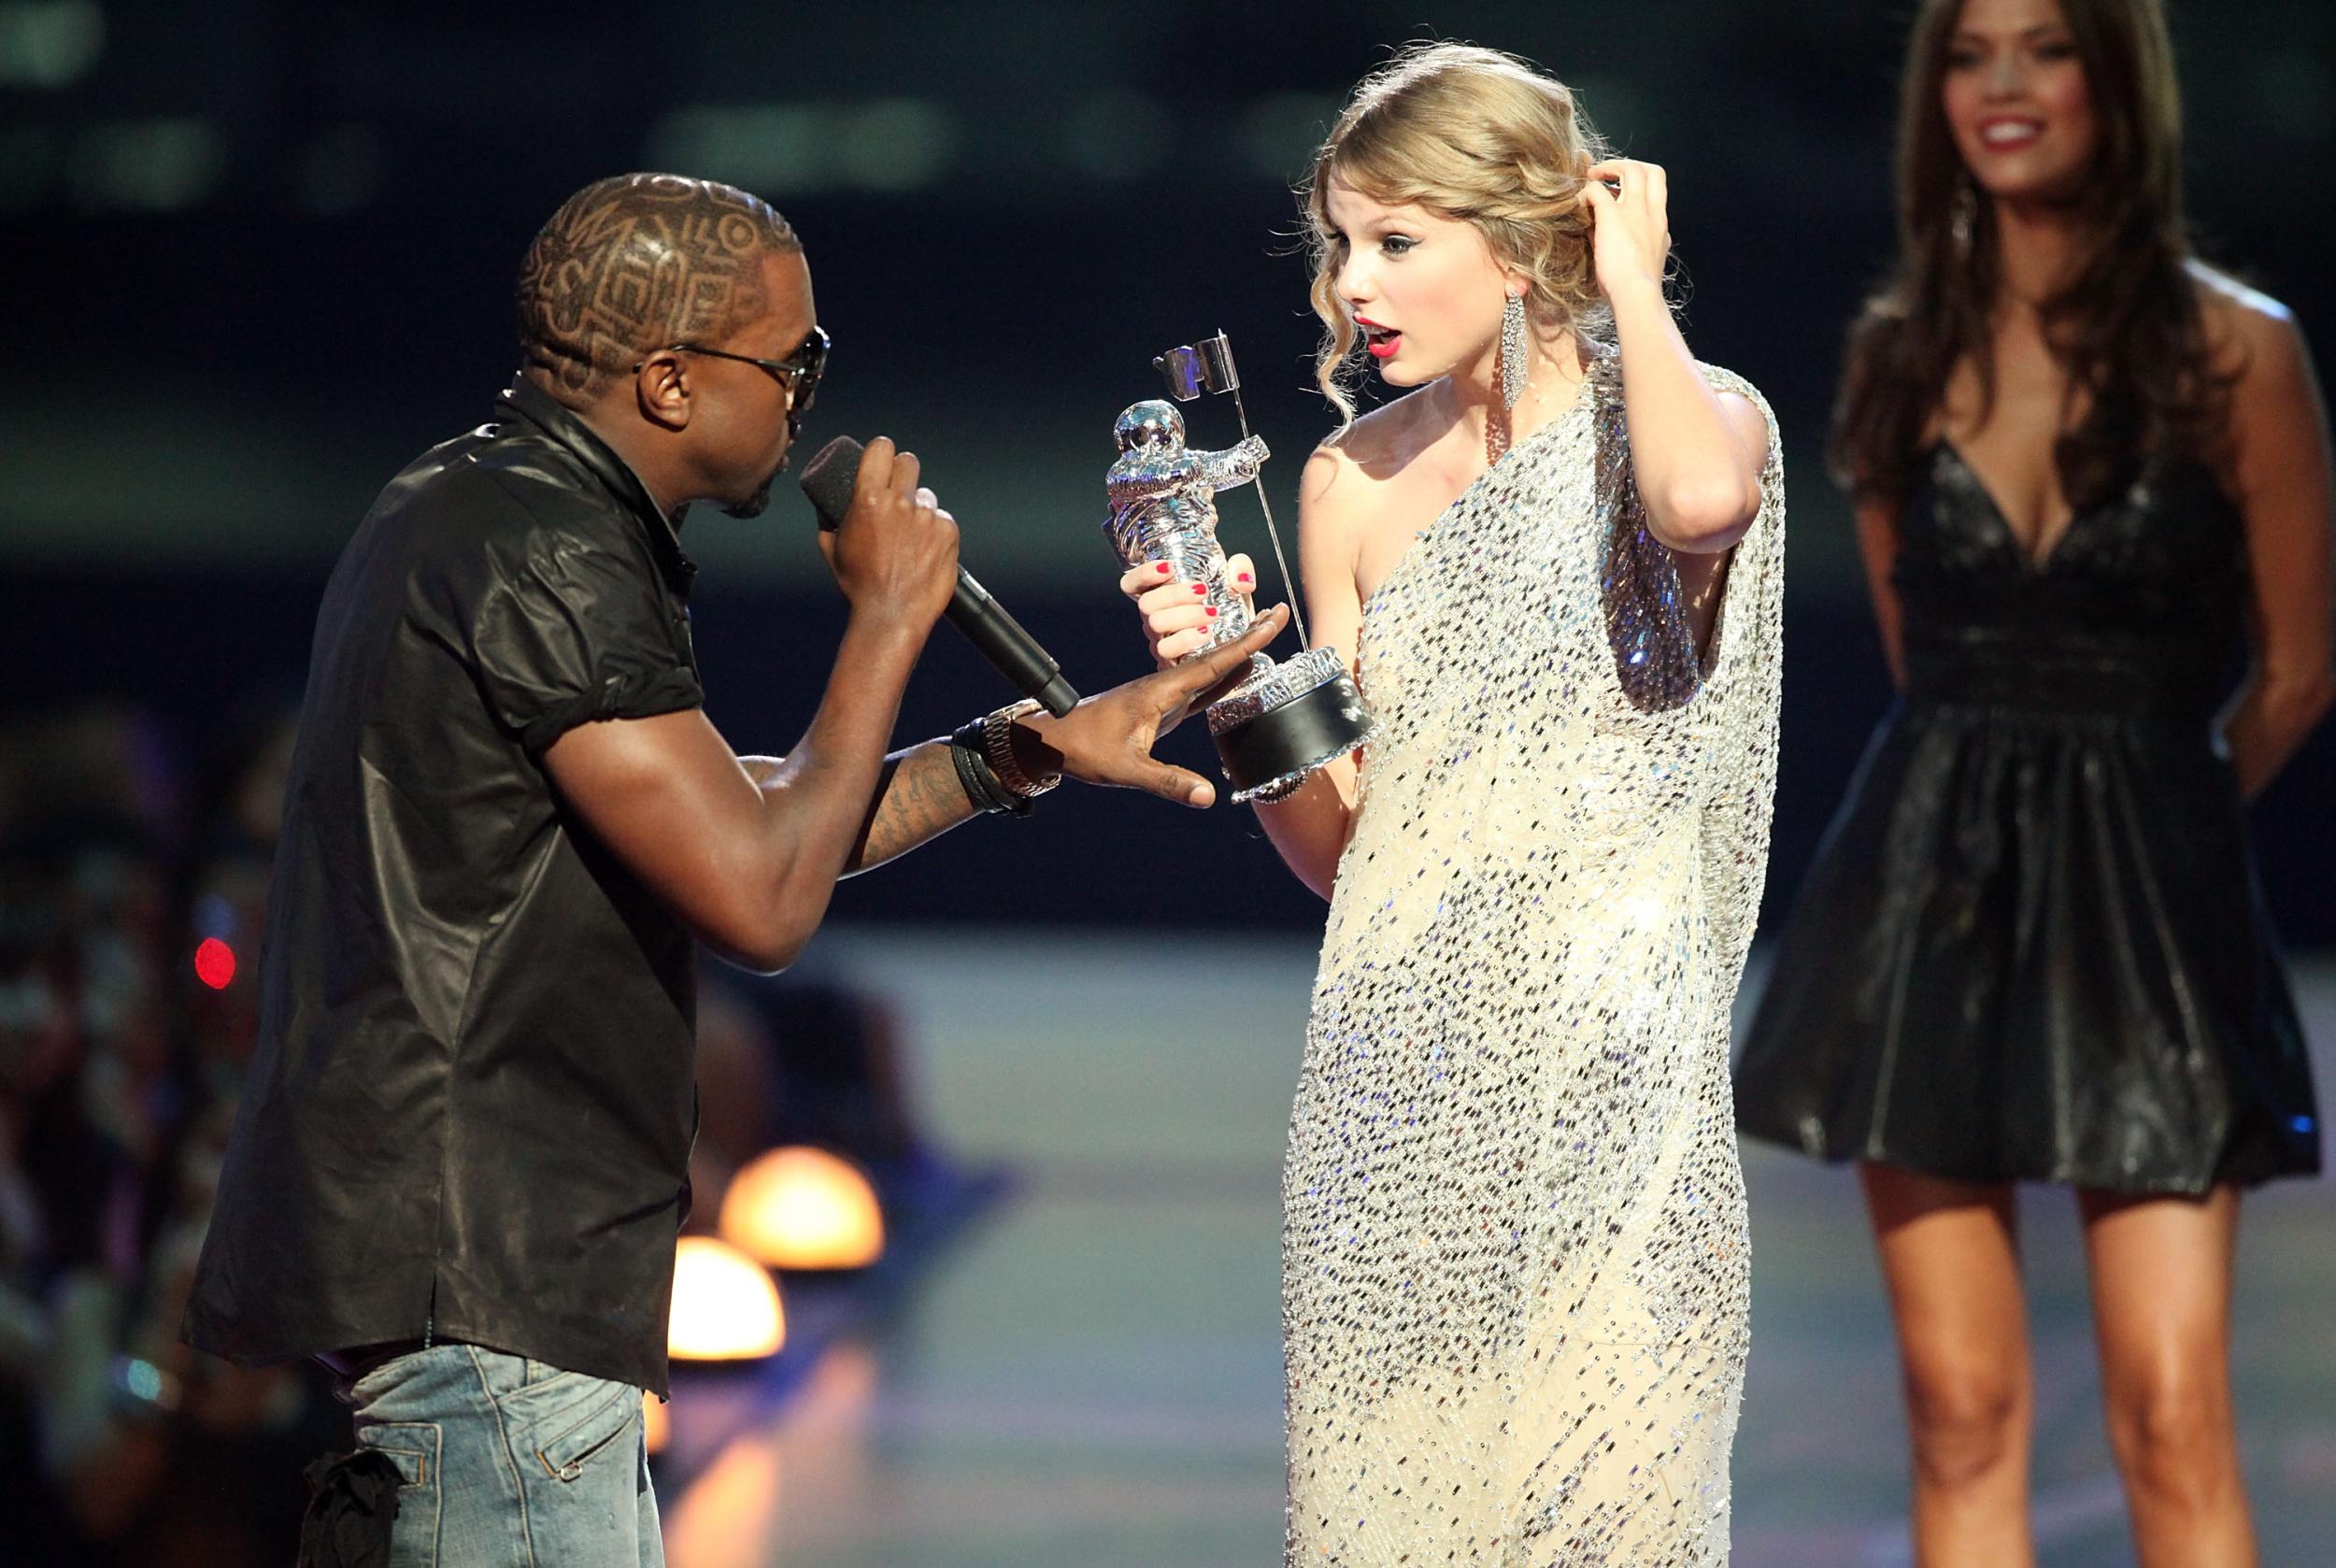 Kanye West interrupts Taylor Swift's acceptance speech at the 2009 VMAs